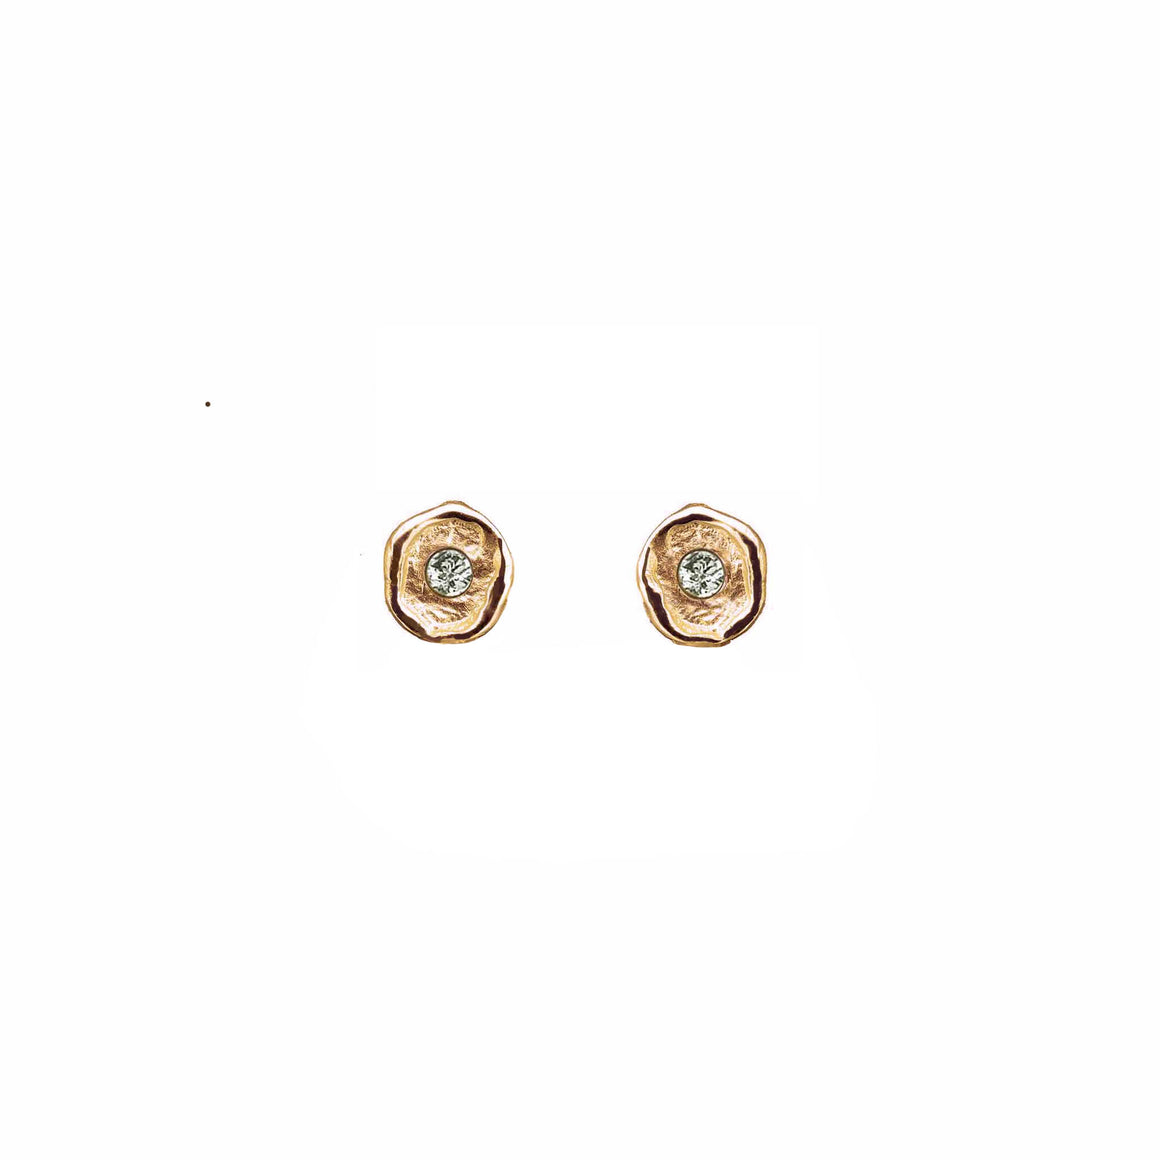 Petite diamond stud earring in rose gold with diamond detail.